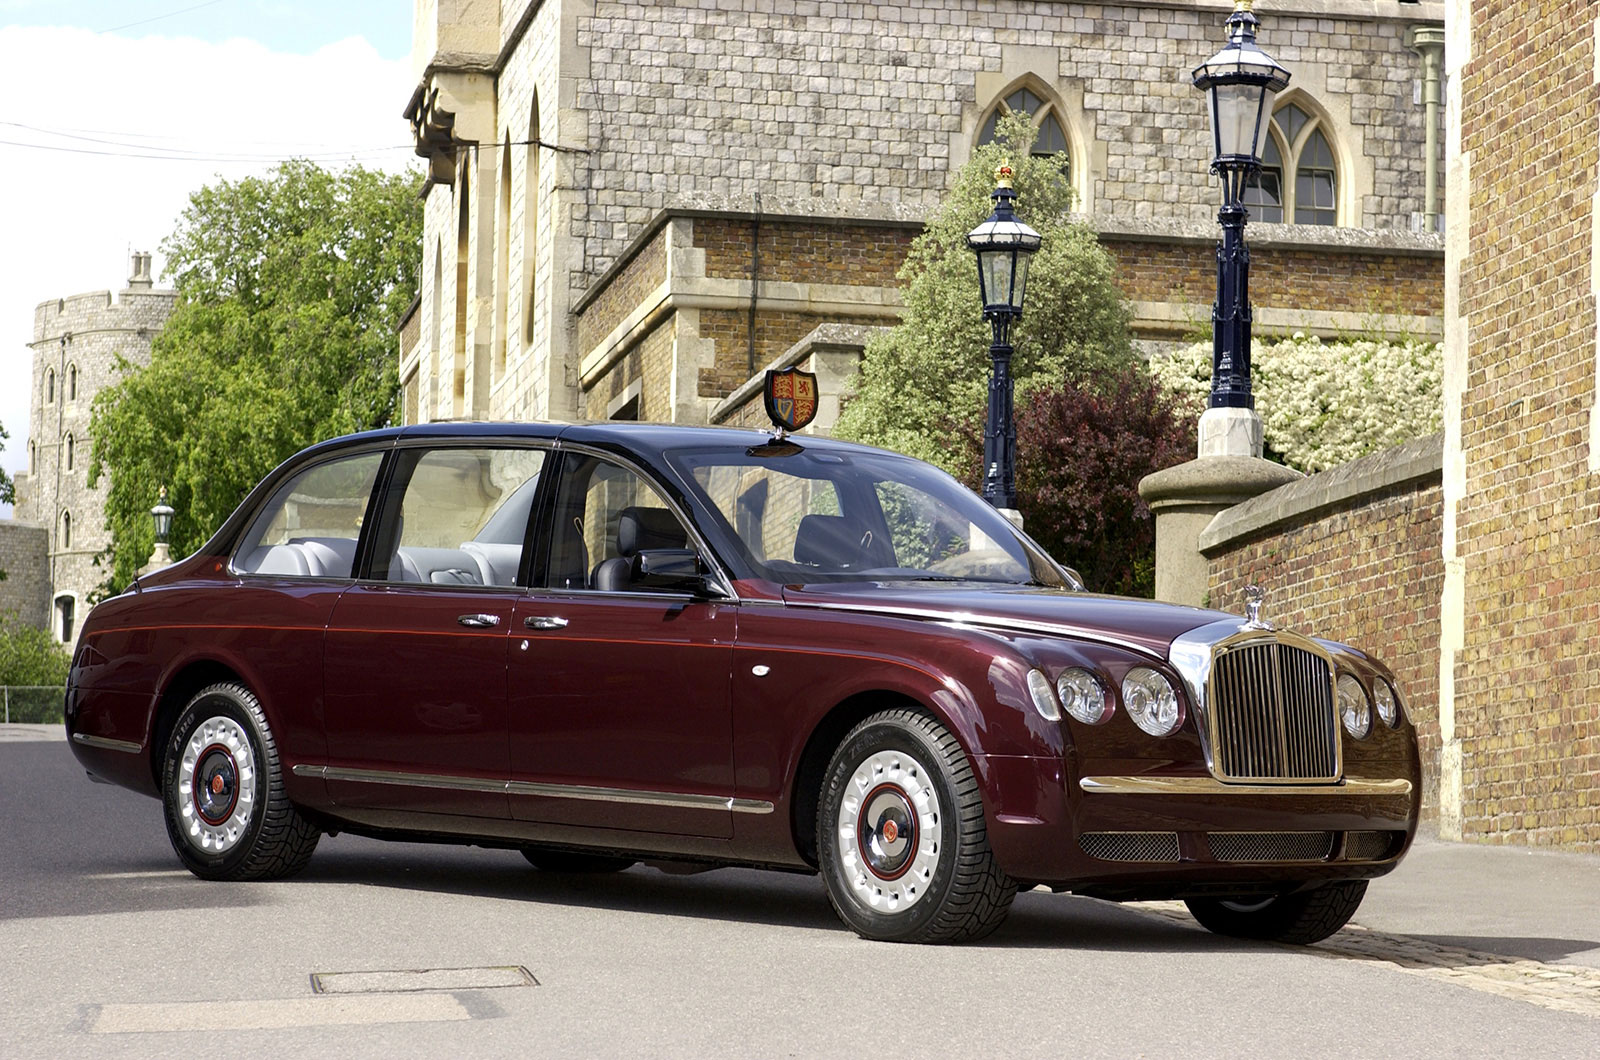 <p>H.M. Queen Elizabeth II celebrated her golden jubilee in 2002, and to mark the occasion Bentley created a unique limousine for her. Powered by a twin-turbo 6.75-liter V8 rated at <strong>405 HP</strong>, the State Limousine was <strong>32.6in </strong>longer than the Bentley Arnage and came with armoured bodywork and glass, the cabin can be sealed air-tight, and the tyres are kevlar-reinforced.</p>